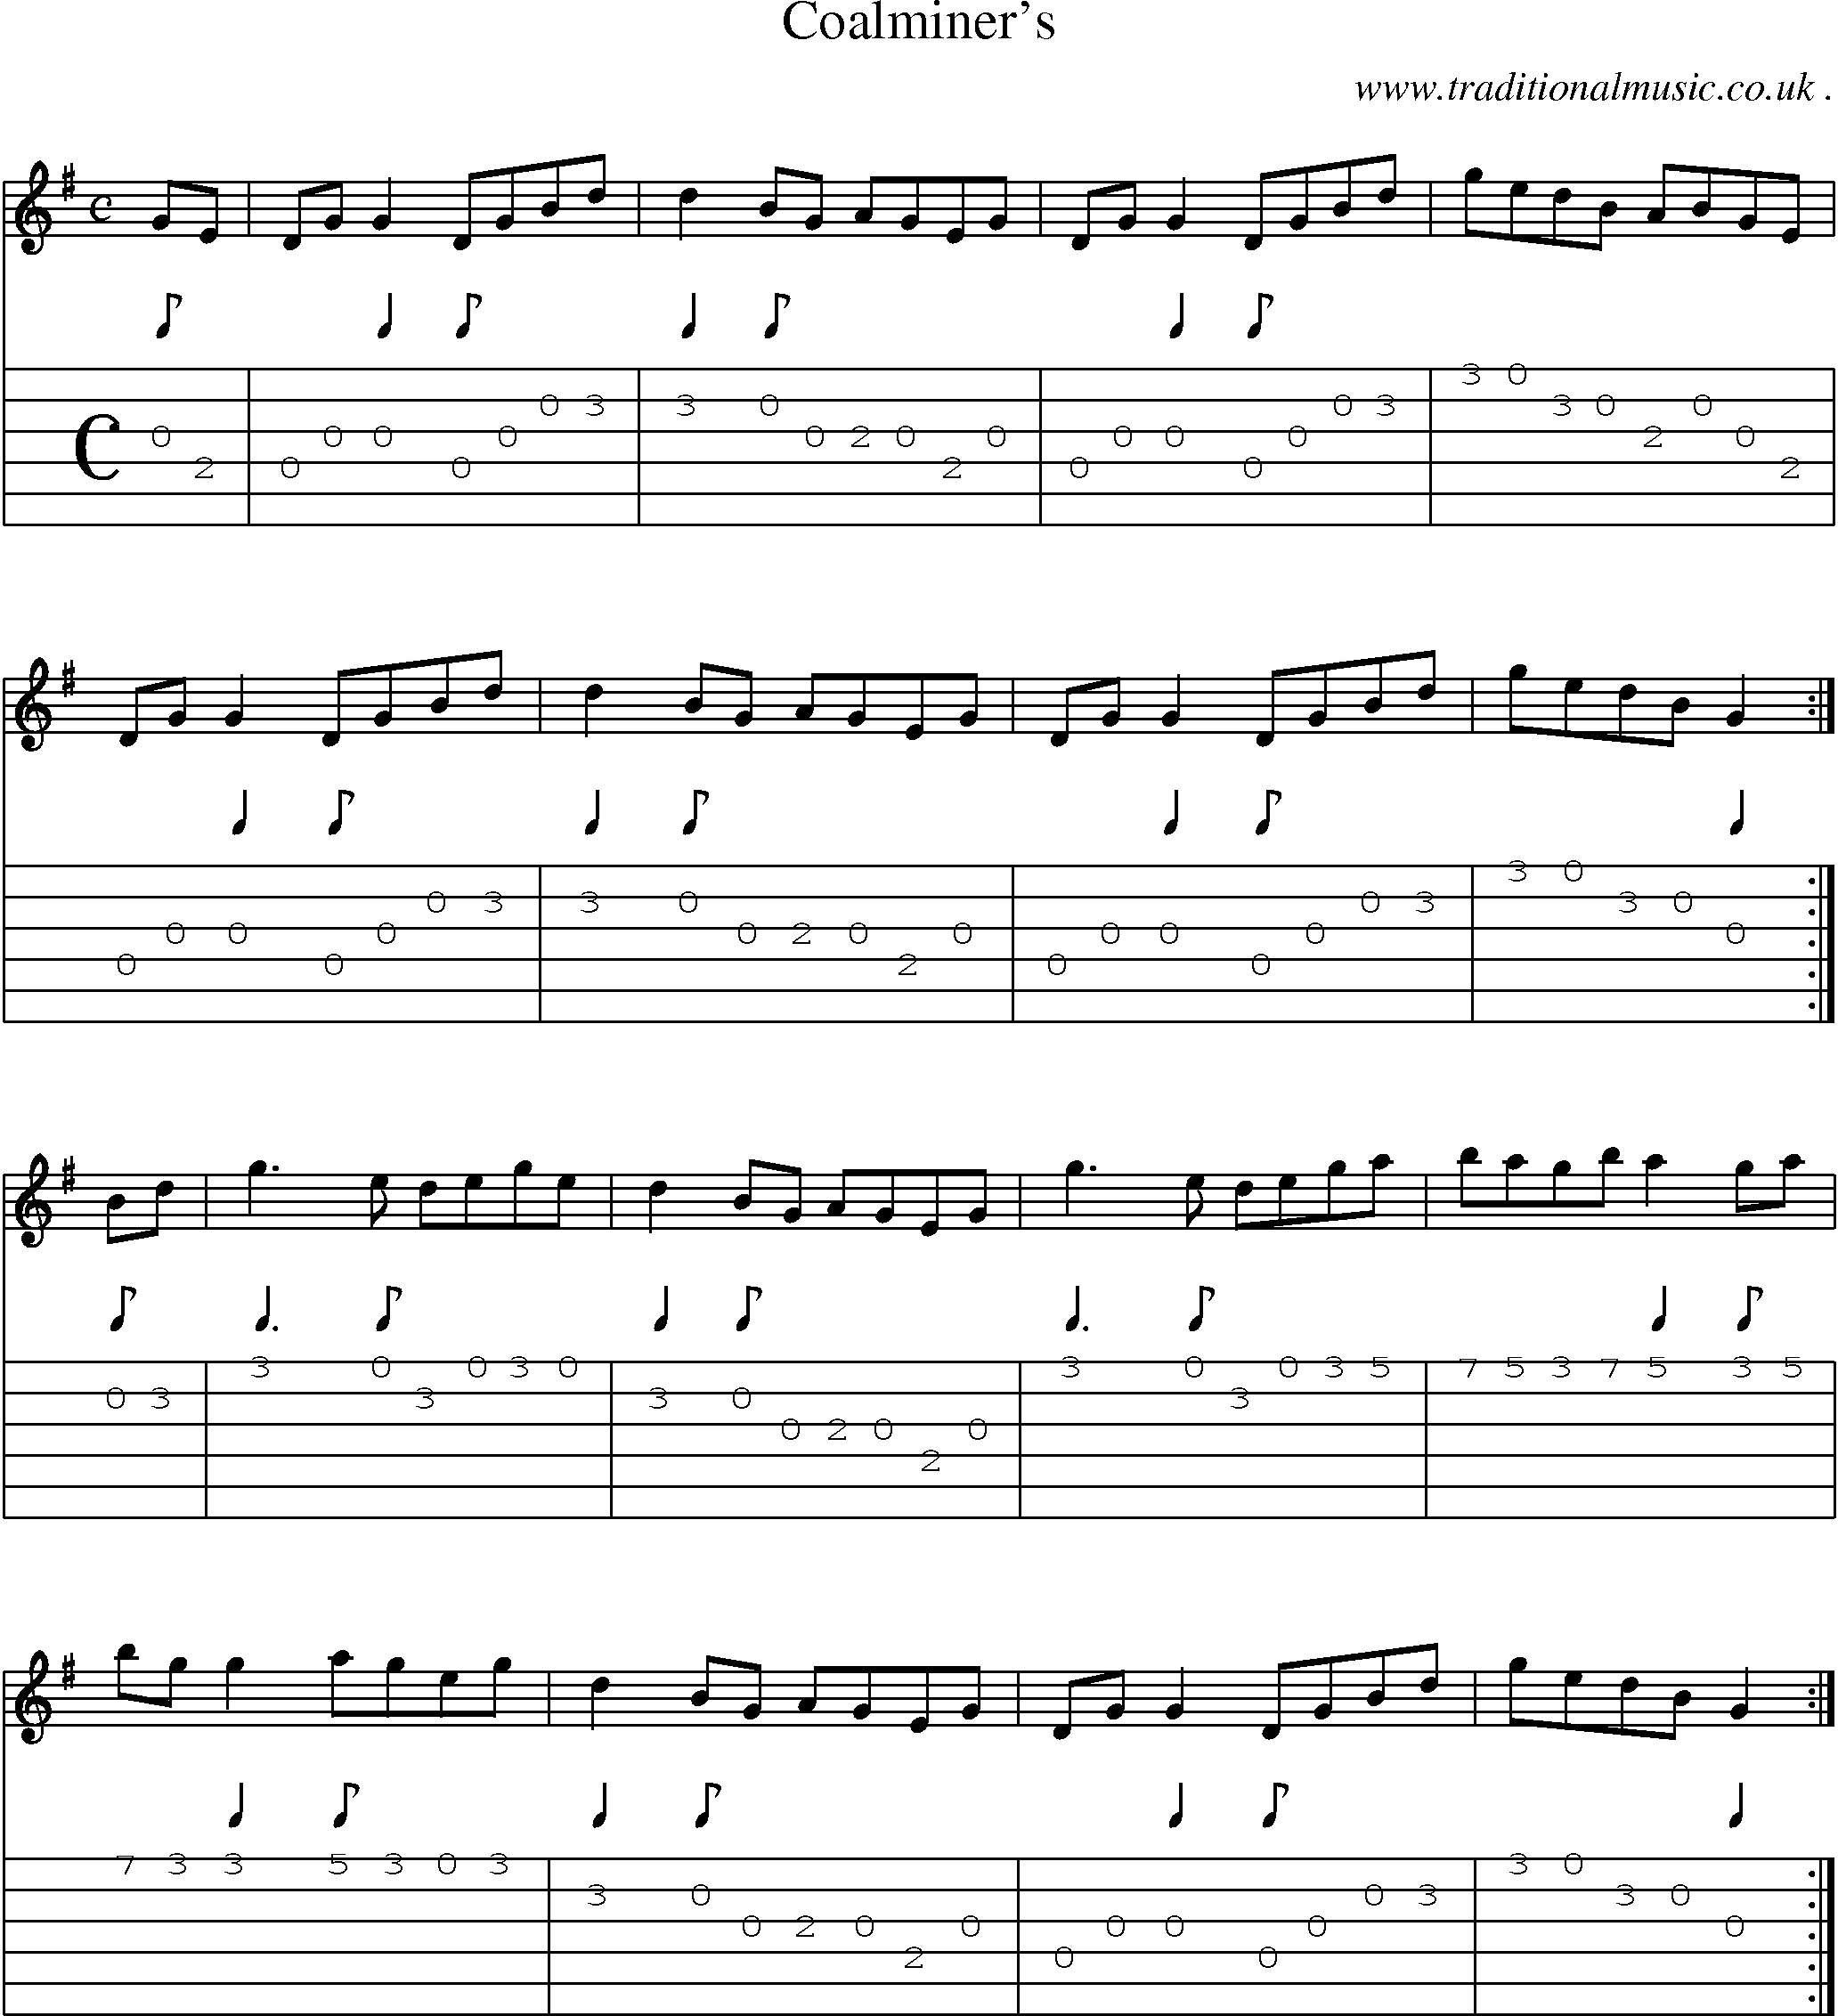 Sheet-Music and Guitar Tabs for Coalminers